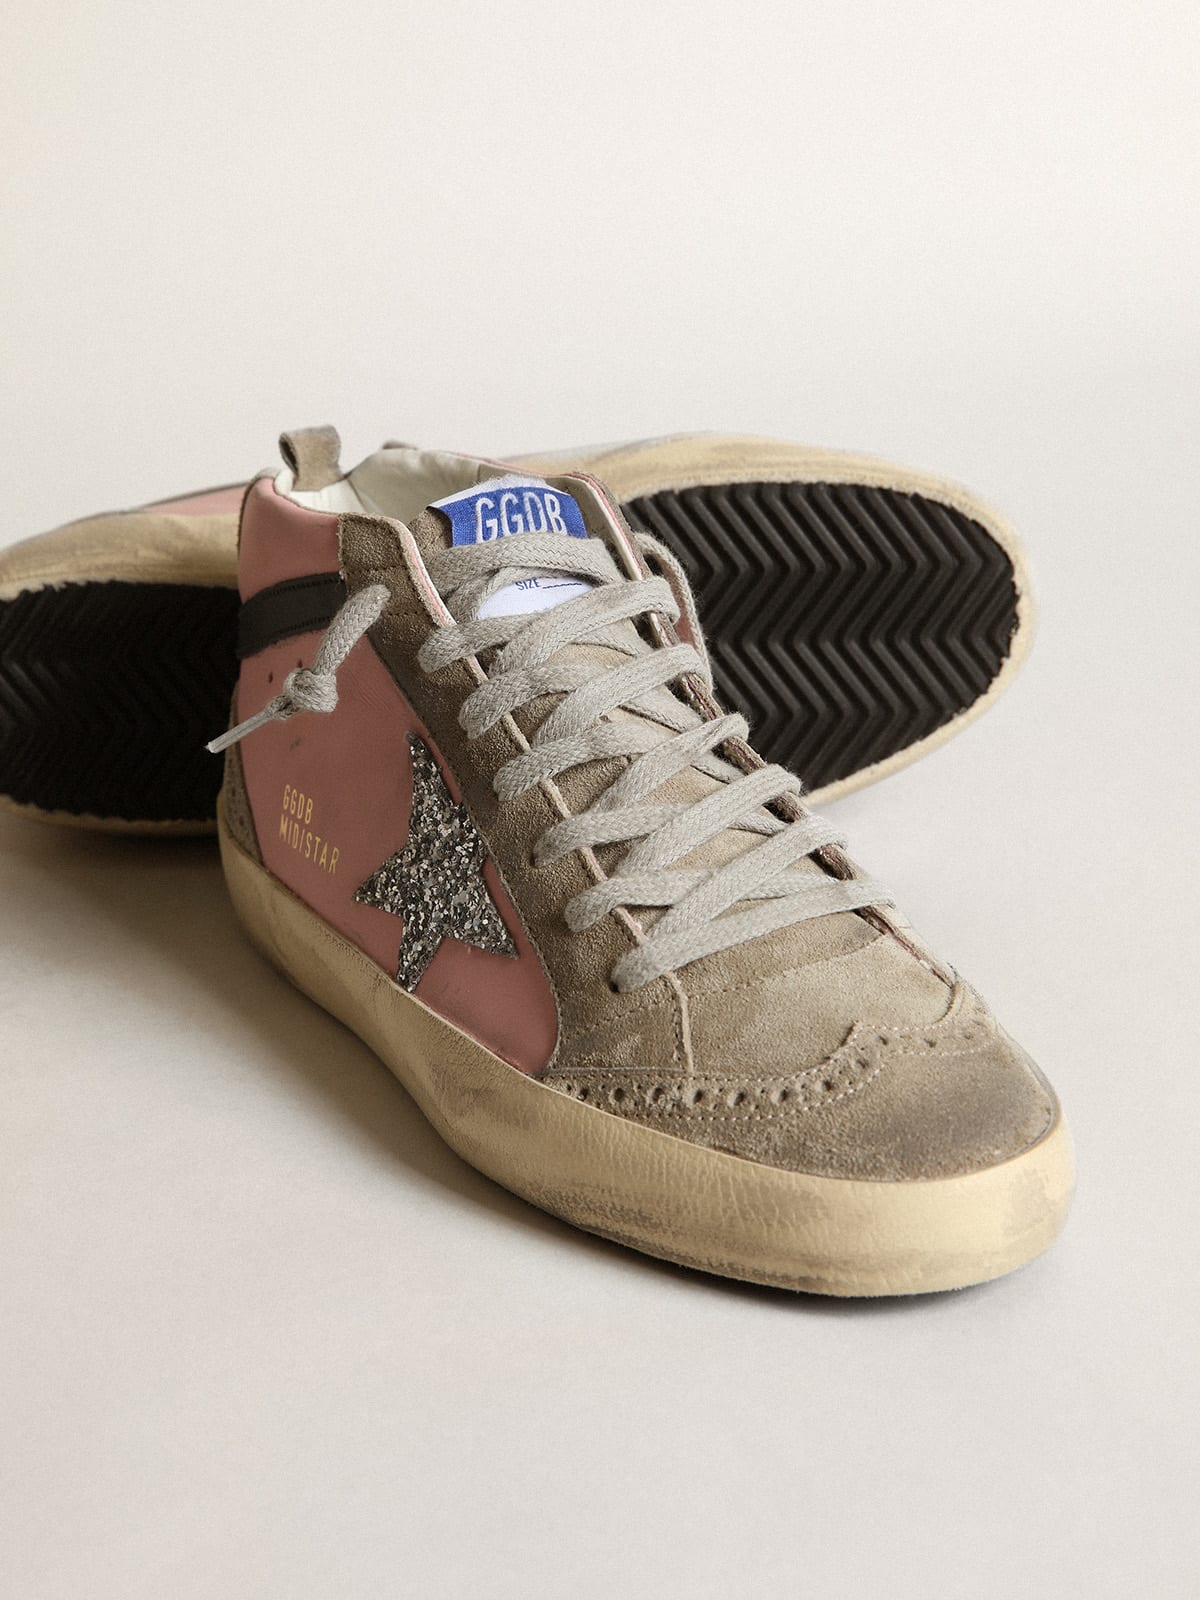 Golden Goose - Mid Star LTD sneakers in pink leather with silver glitter star and black leather flash in 